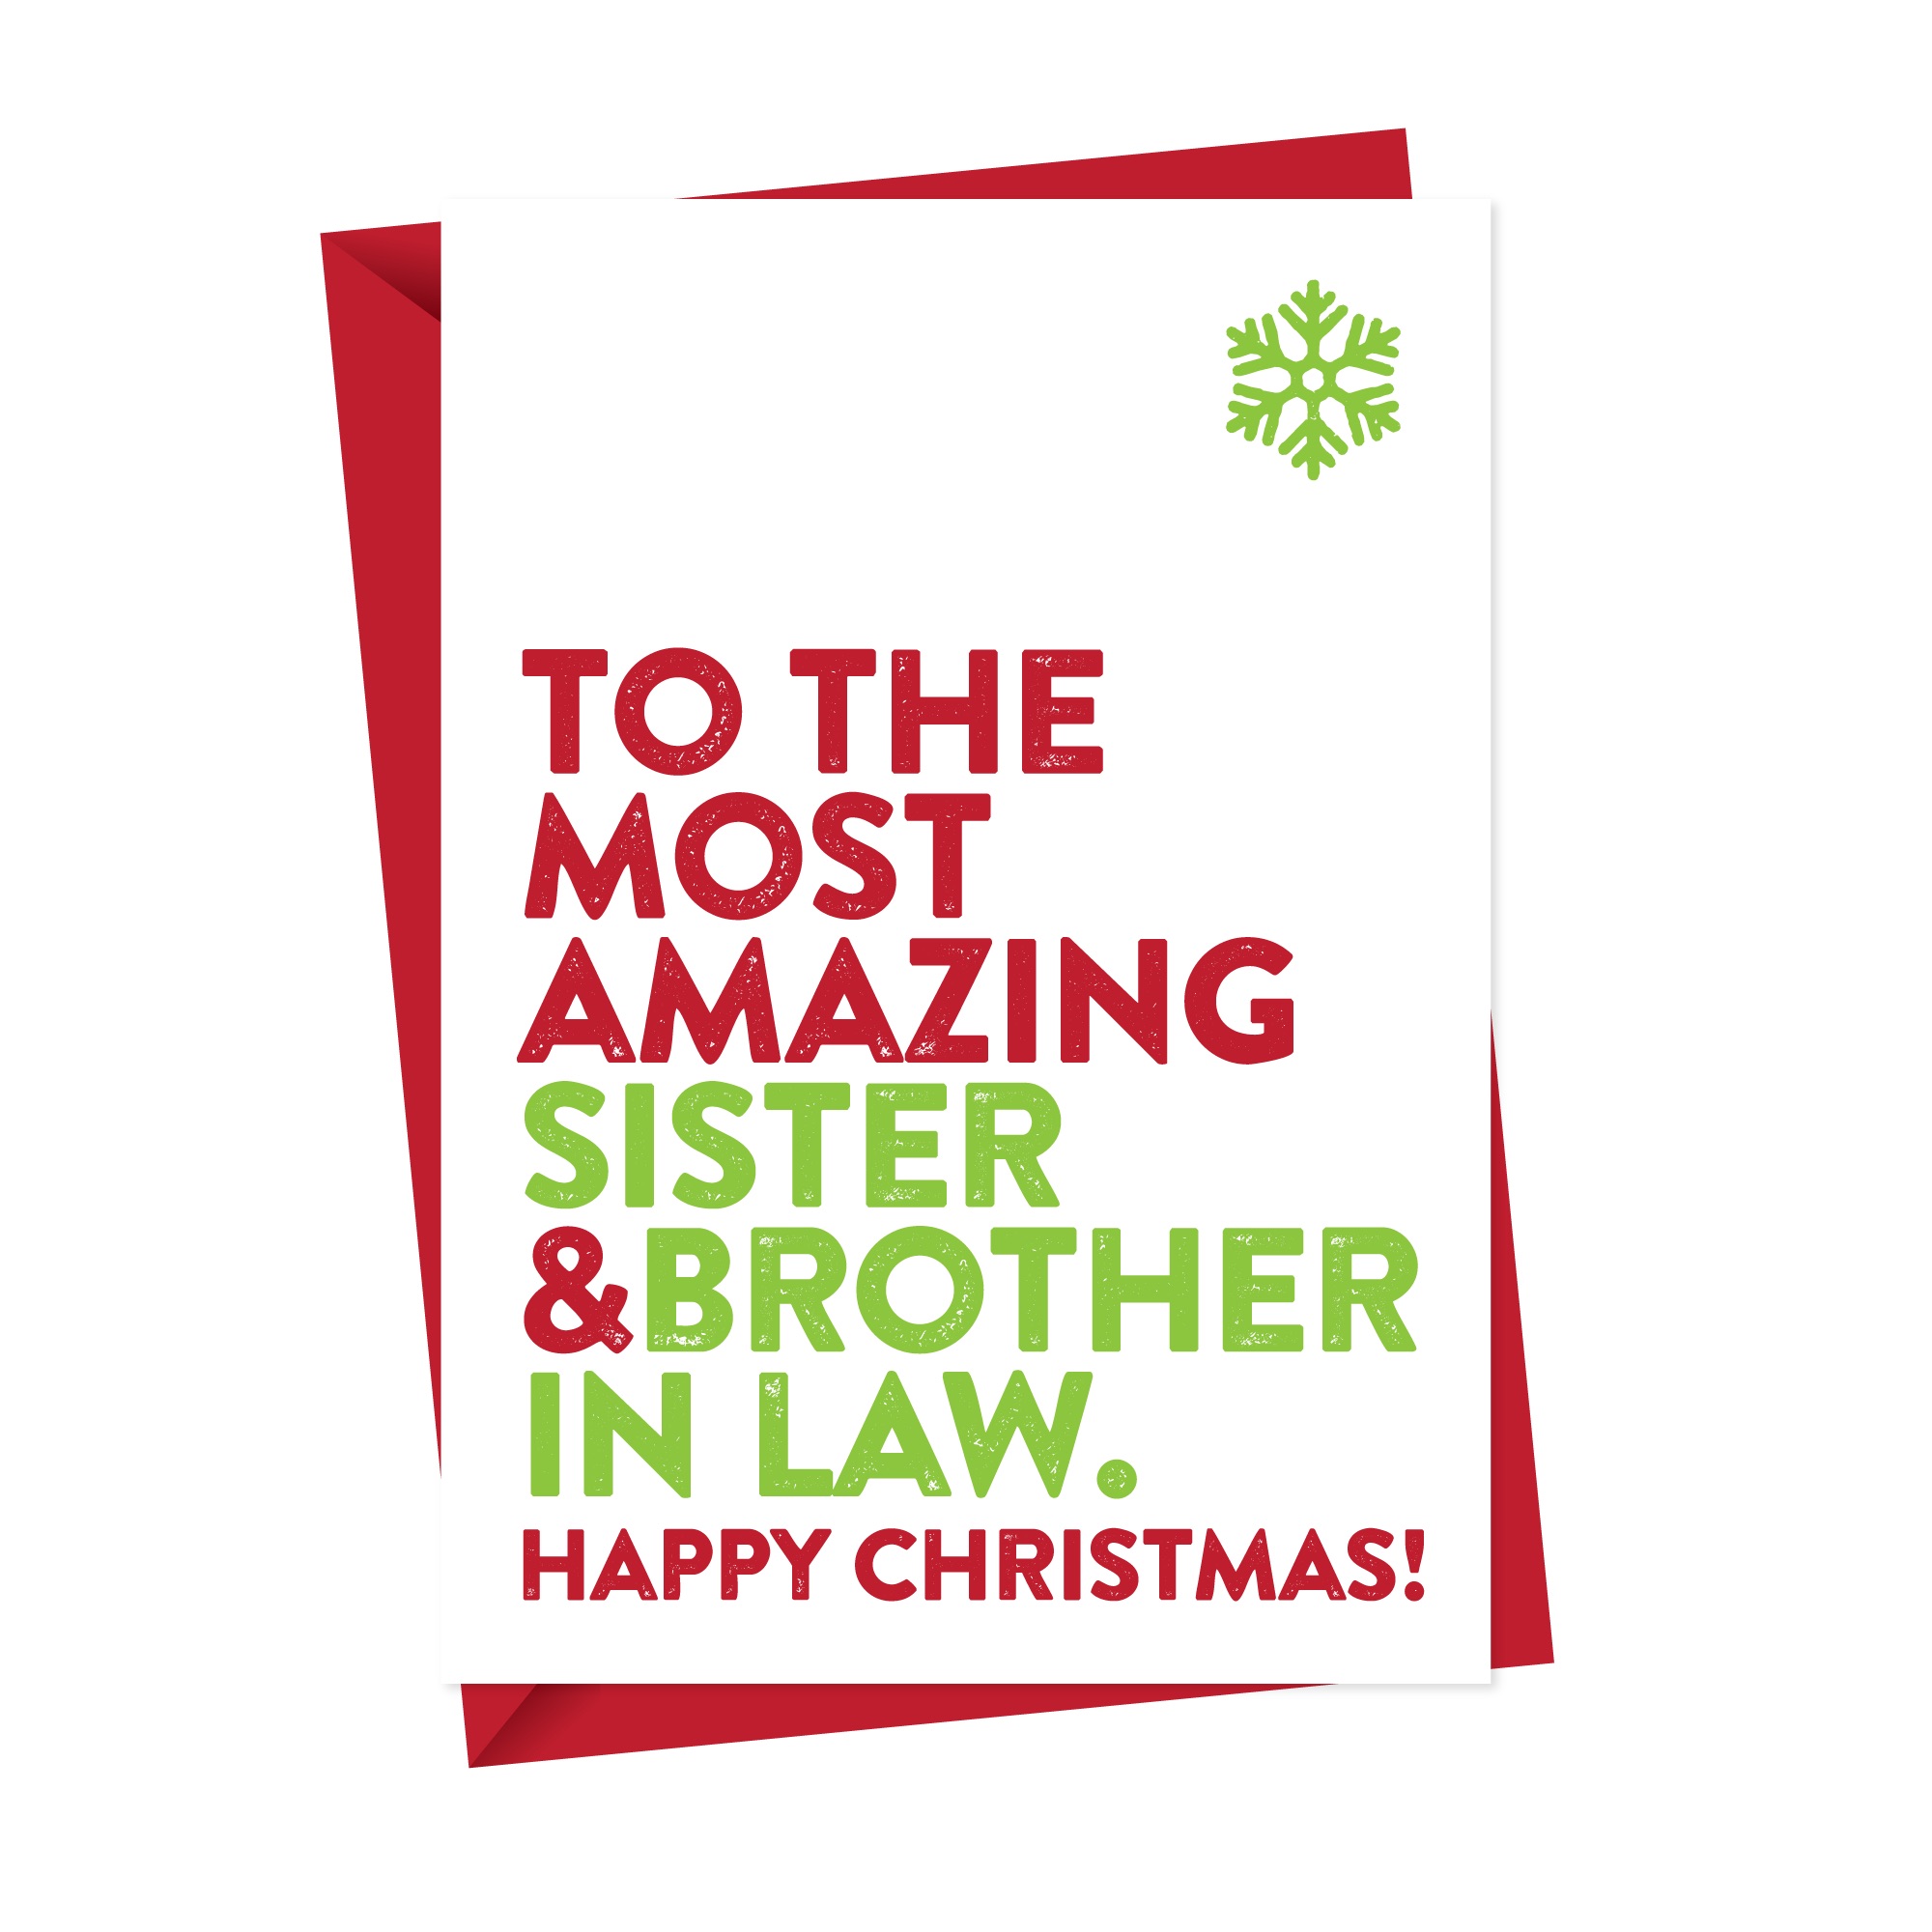 Most Amazing Sister & Brother in Law Christmas Card